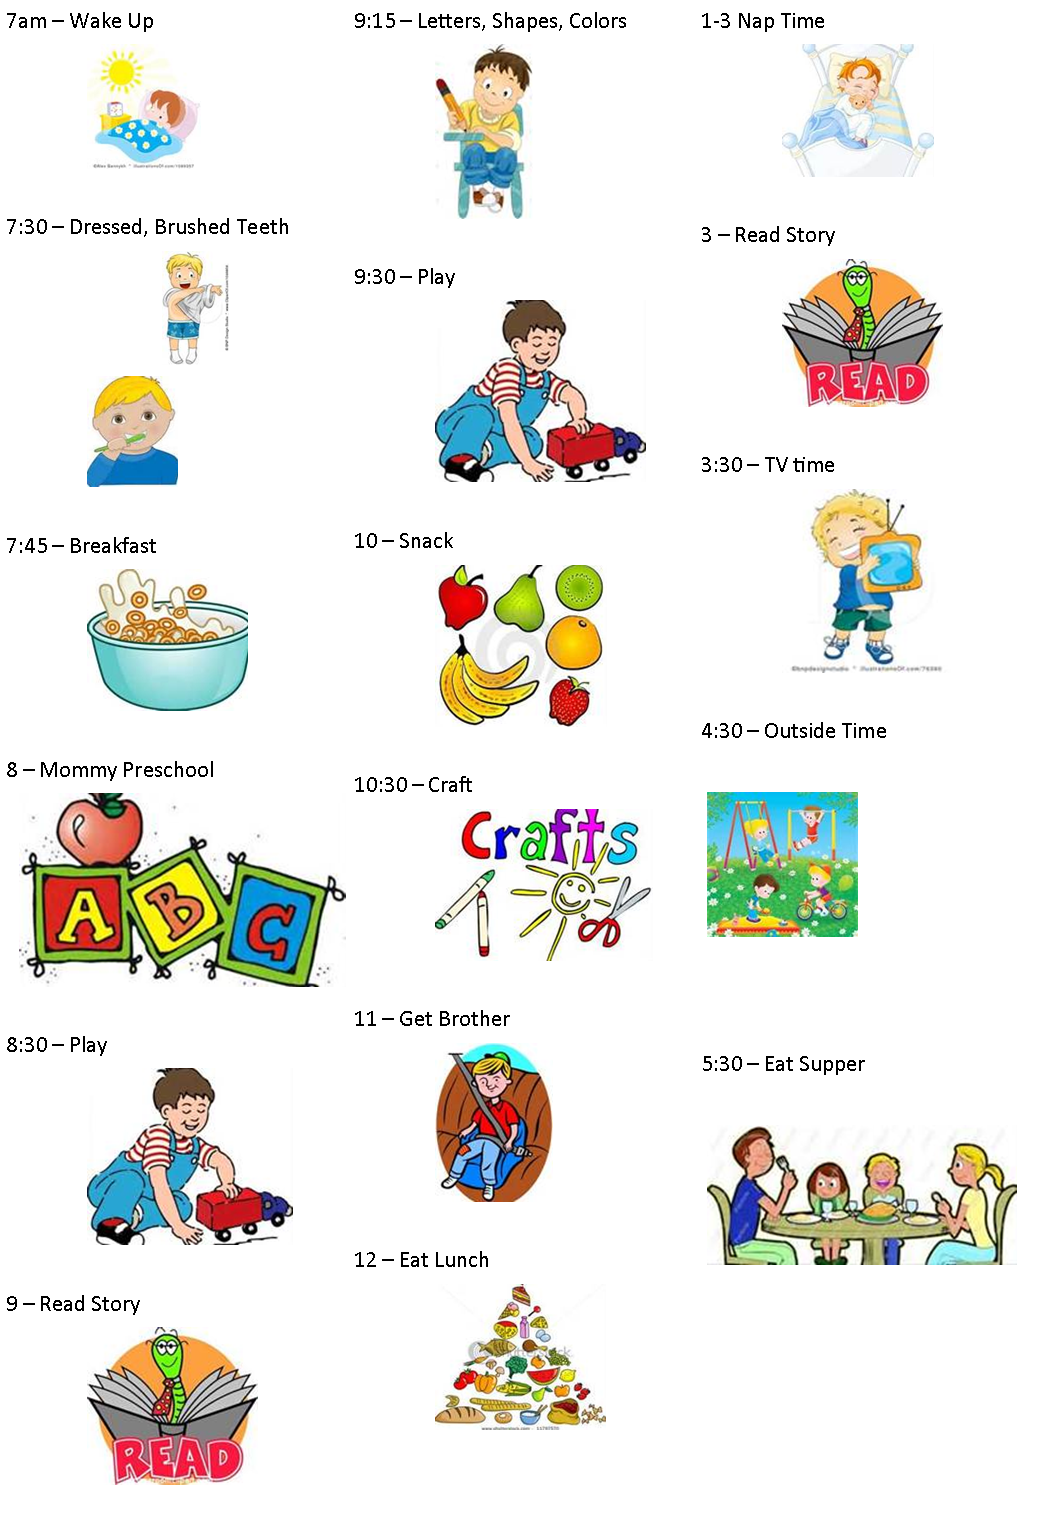 Our acres creating a. Folder clipart daily work